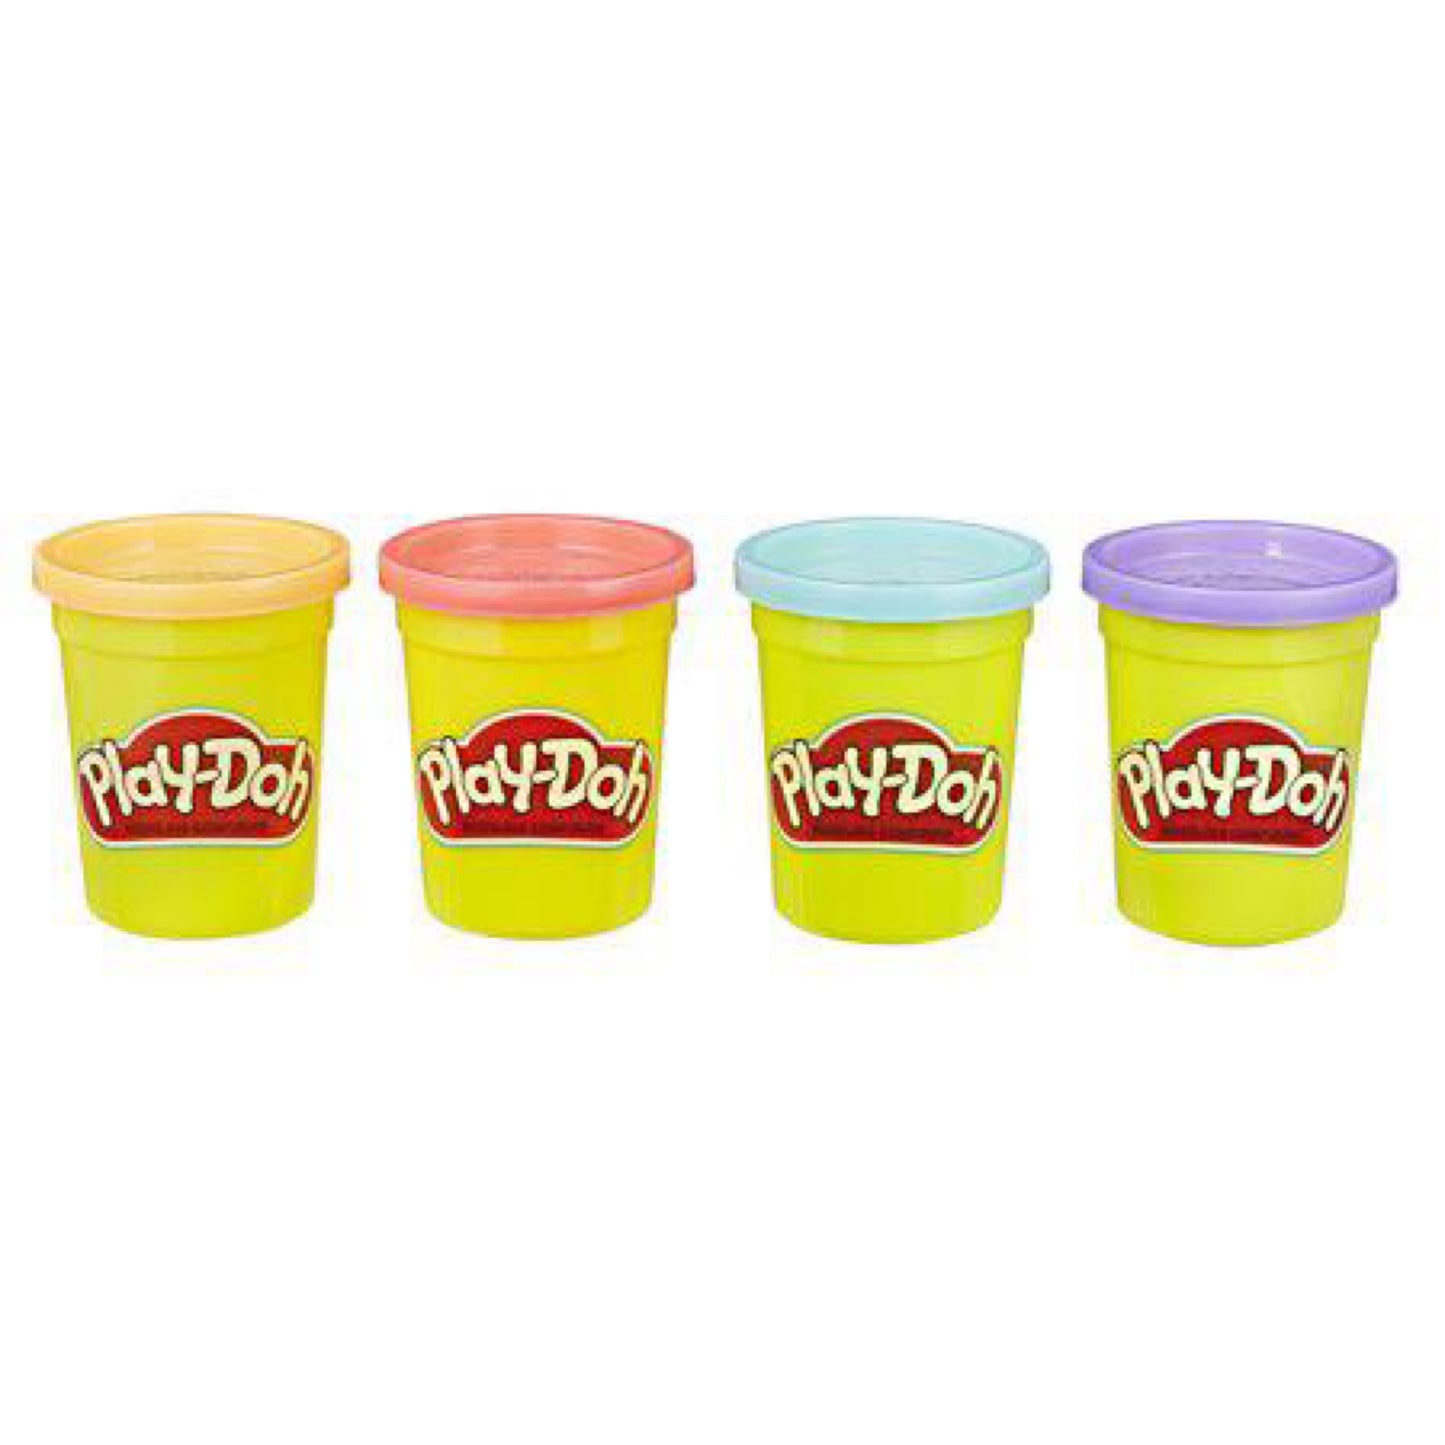 Play-Doh Classic Colors Wave 3 Case